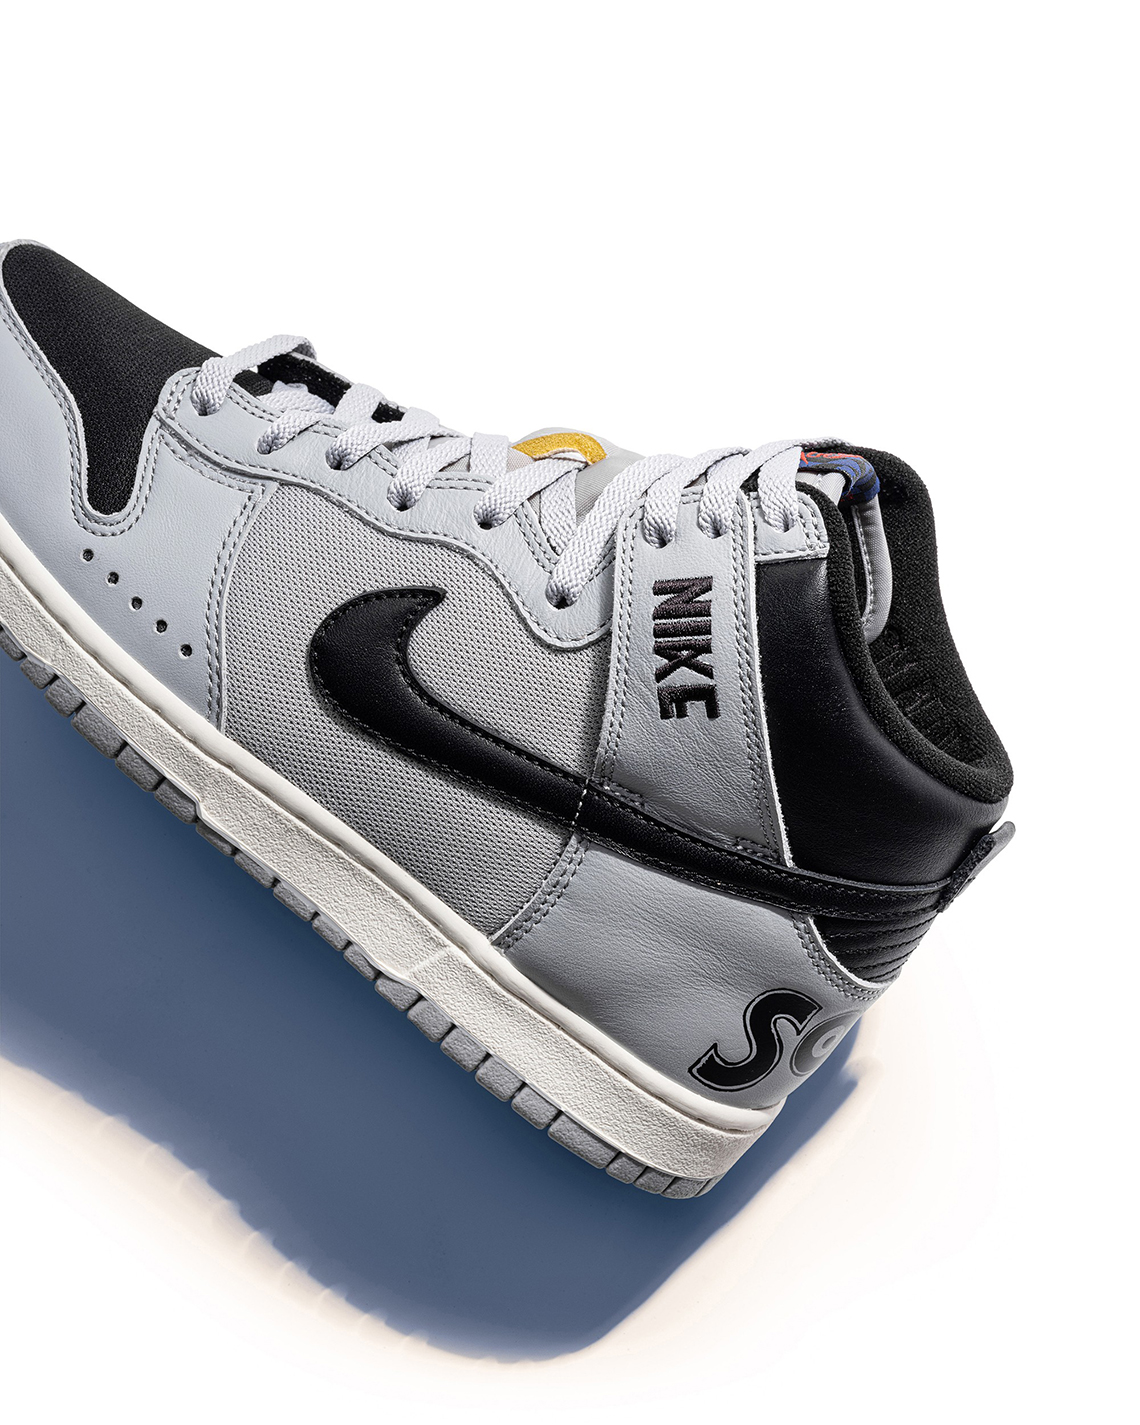 SOULGOODS Nike SB Dunk High Collection Release Info | SneakerNews.com